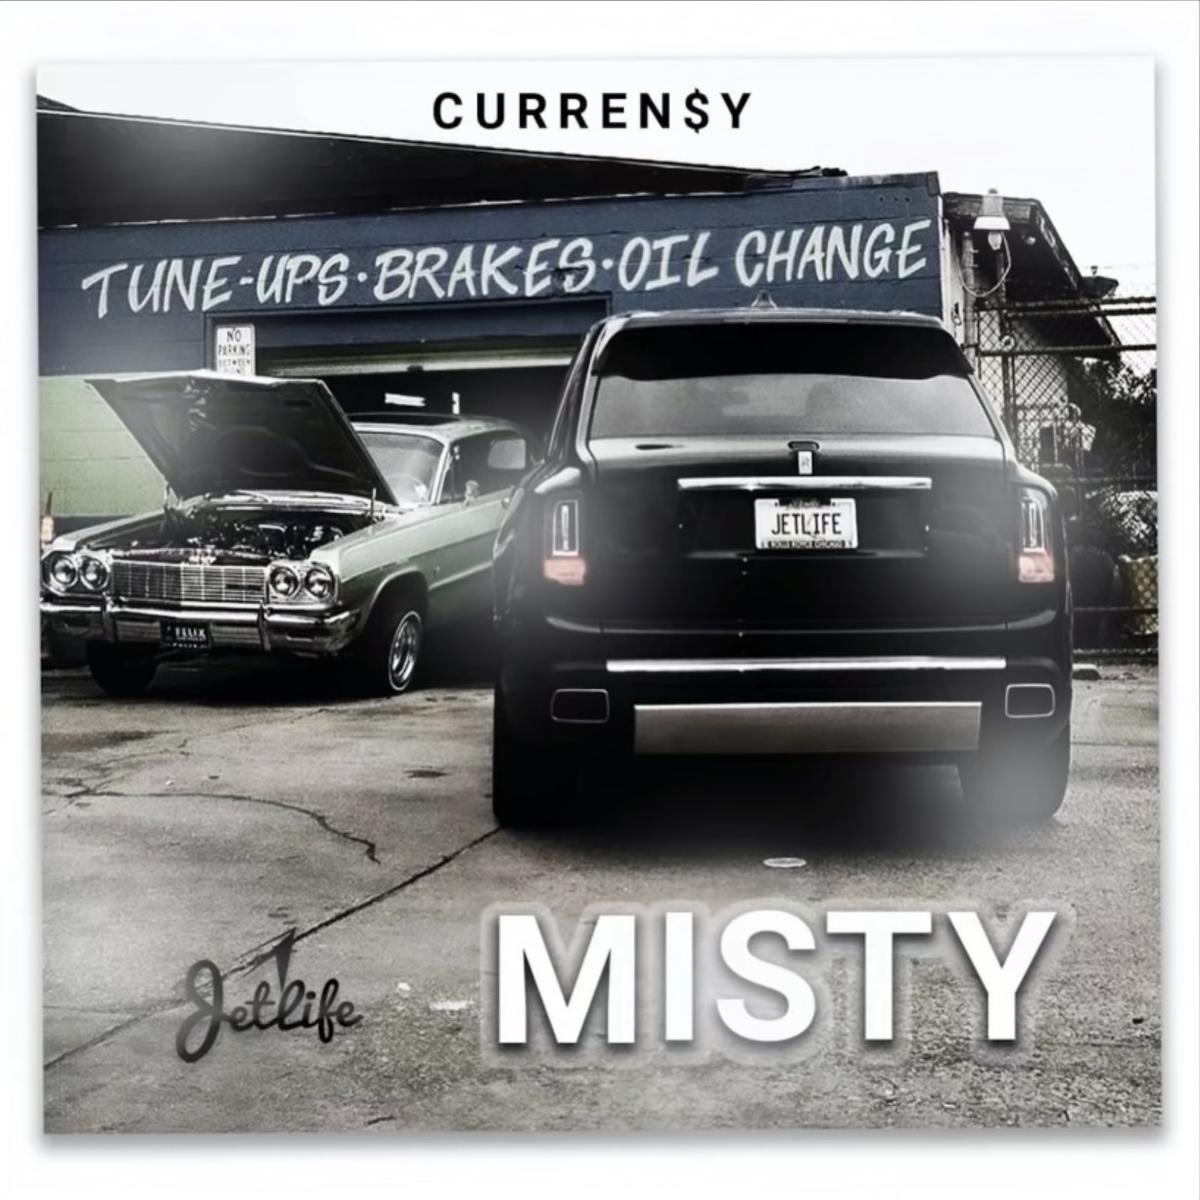 Currensy - Misty